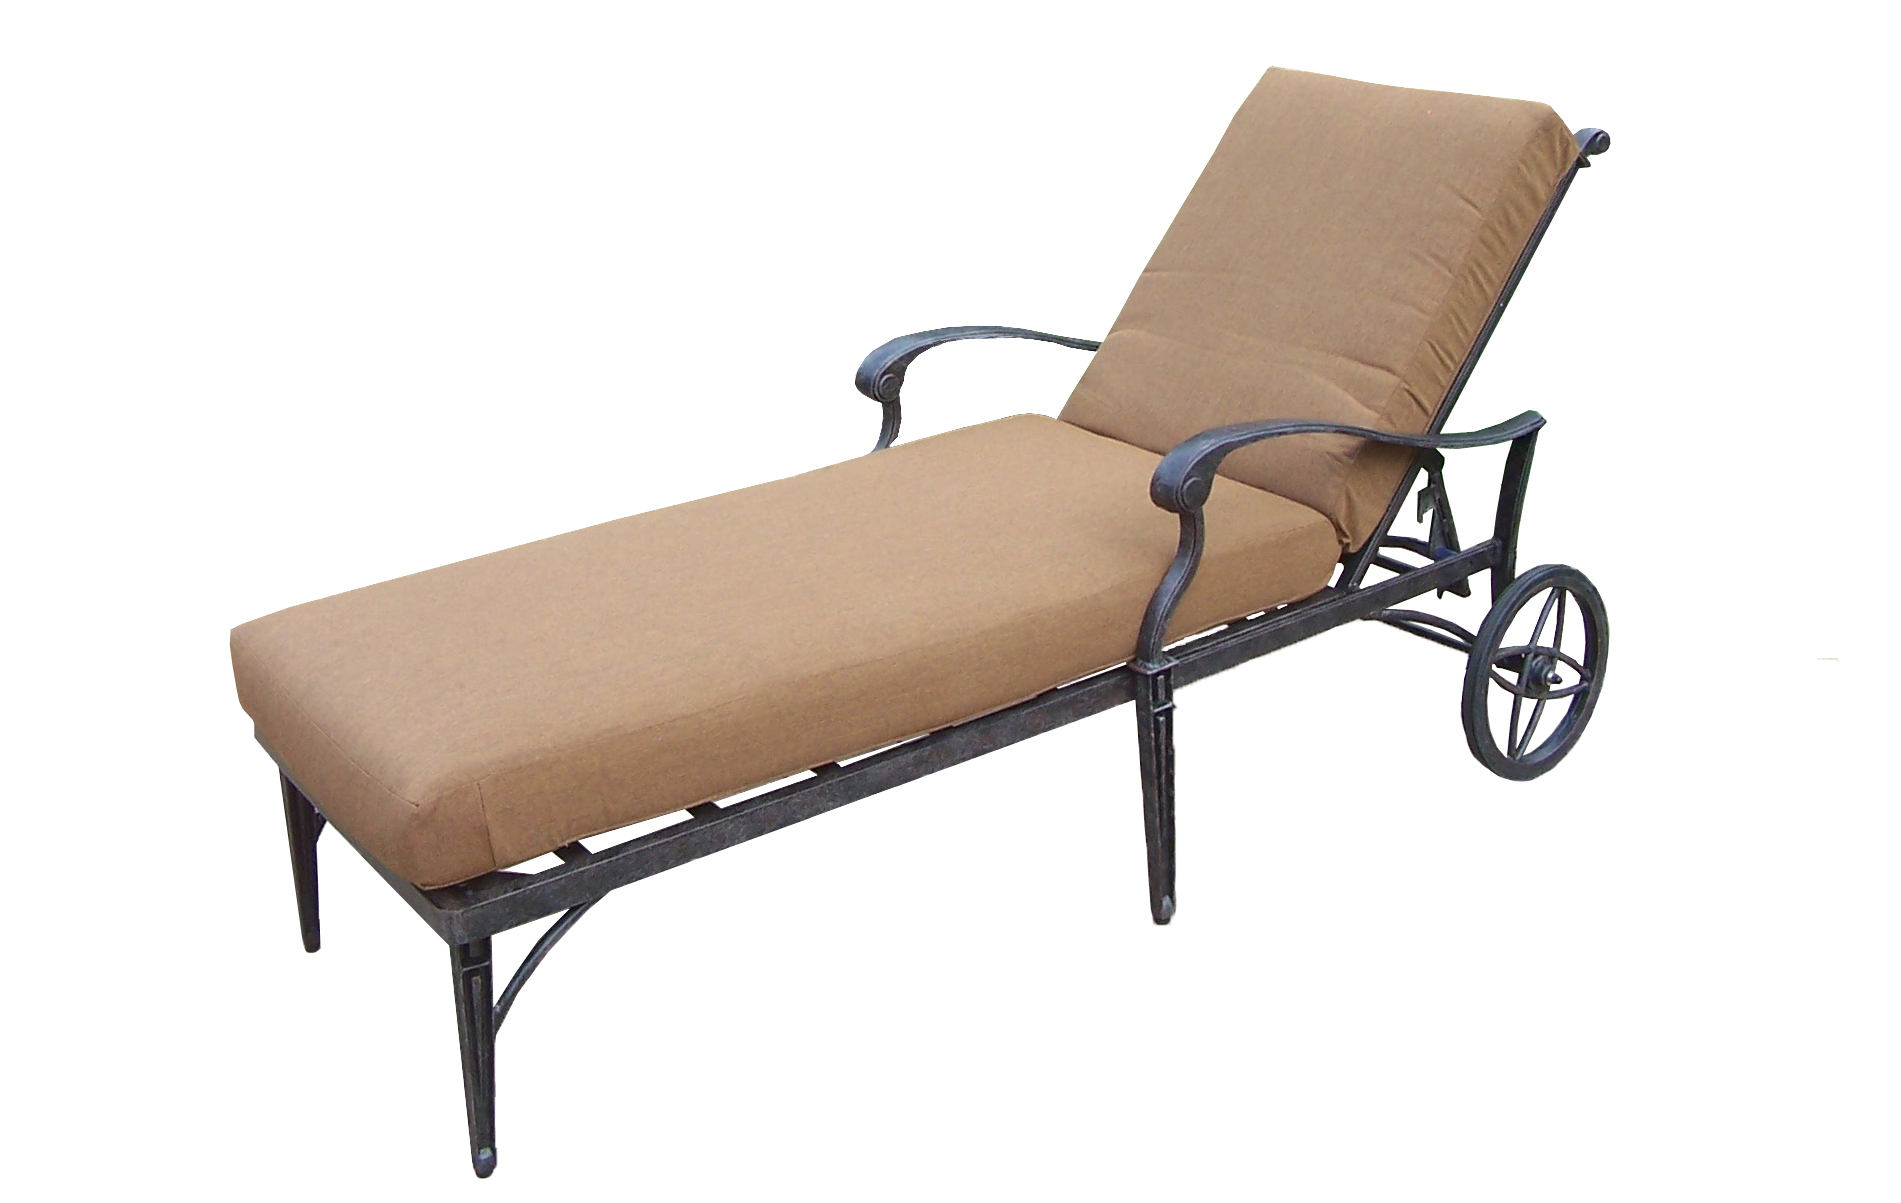 Oakland Living Aluminum Chaise Lounge on wheels with ...